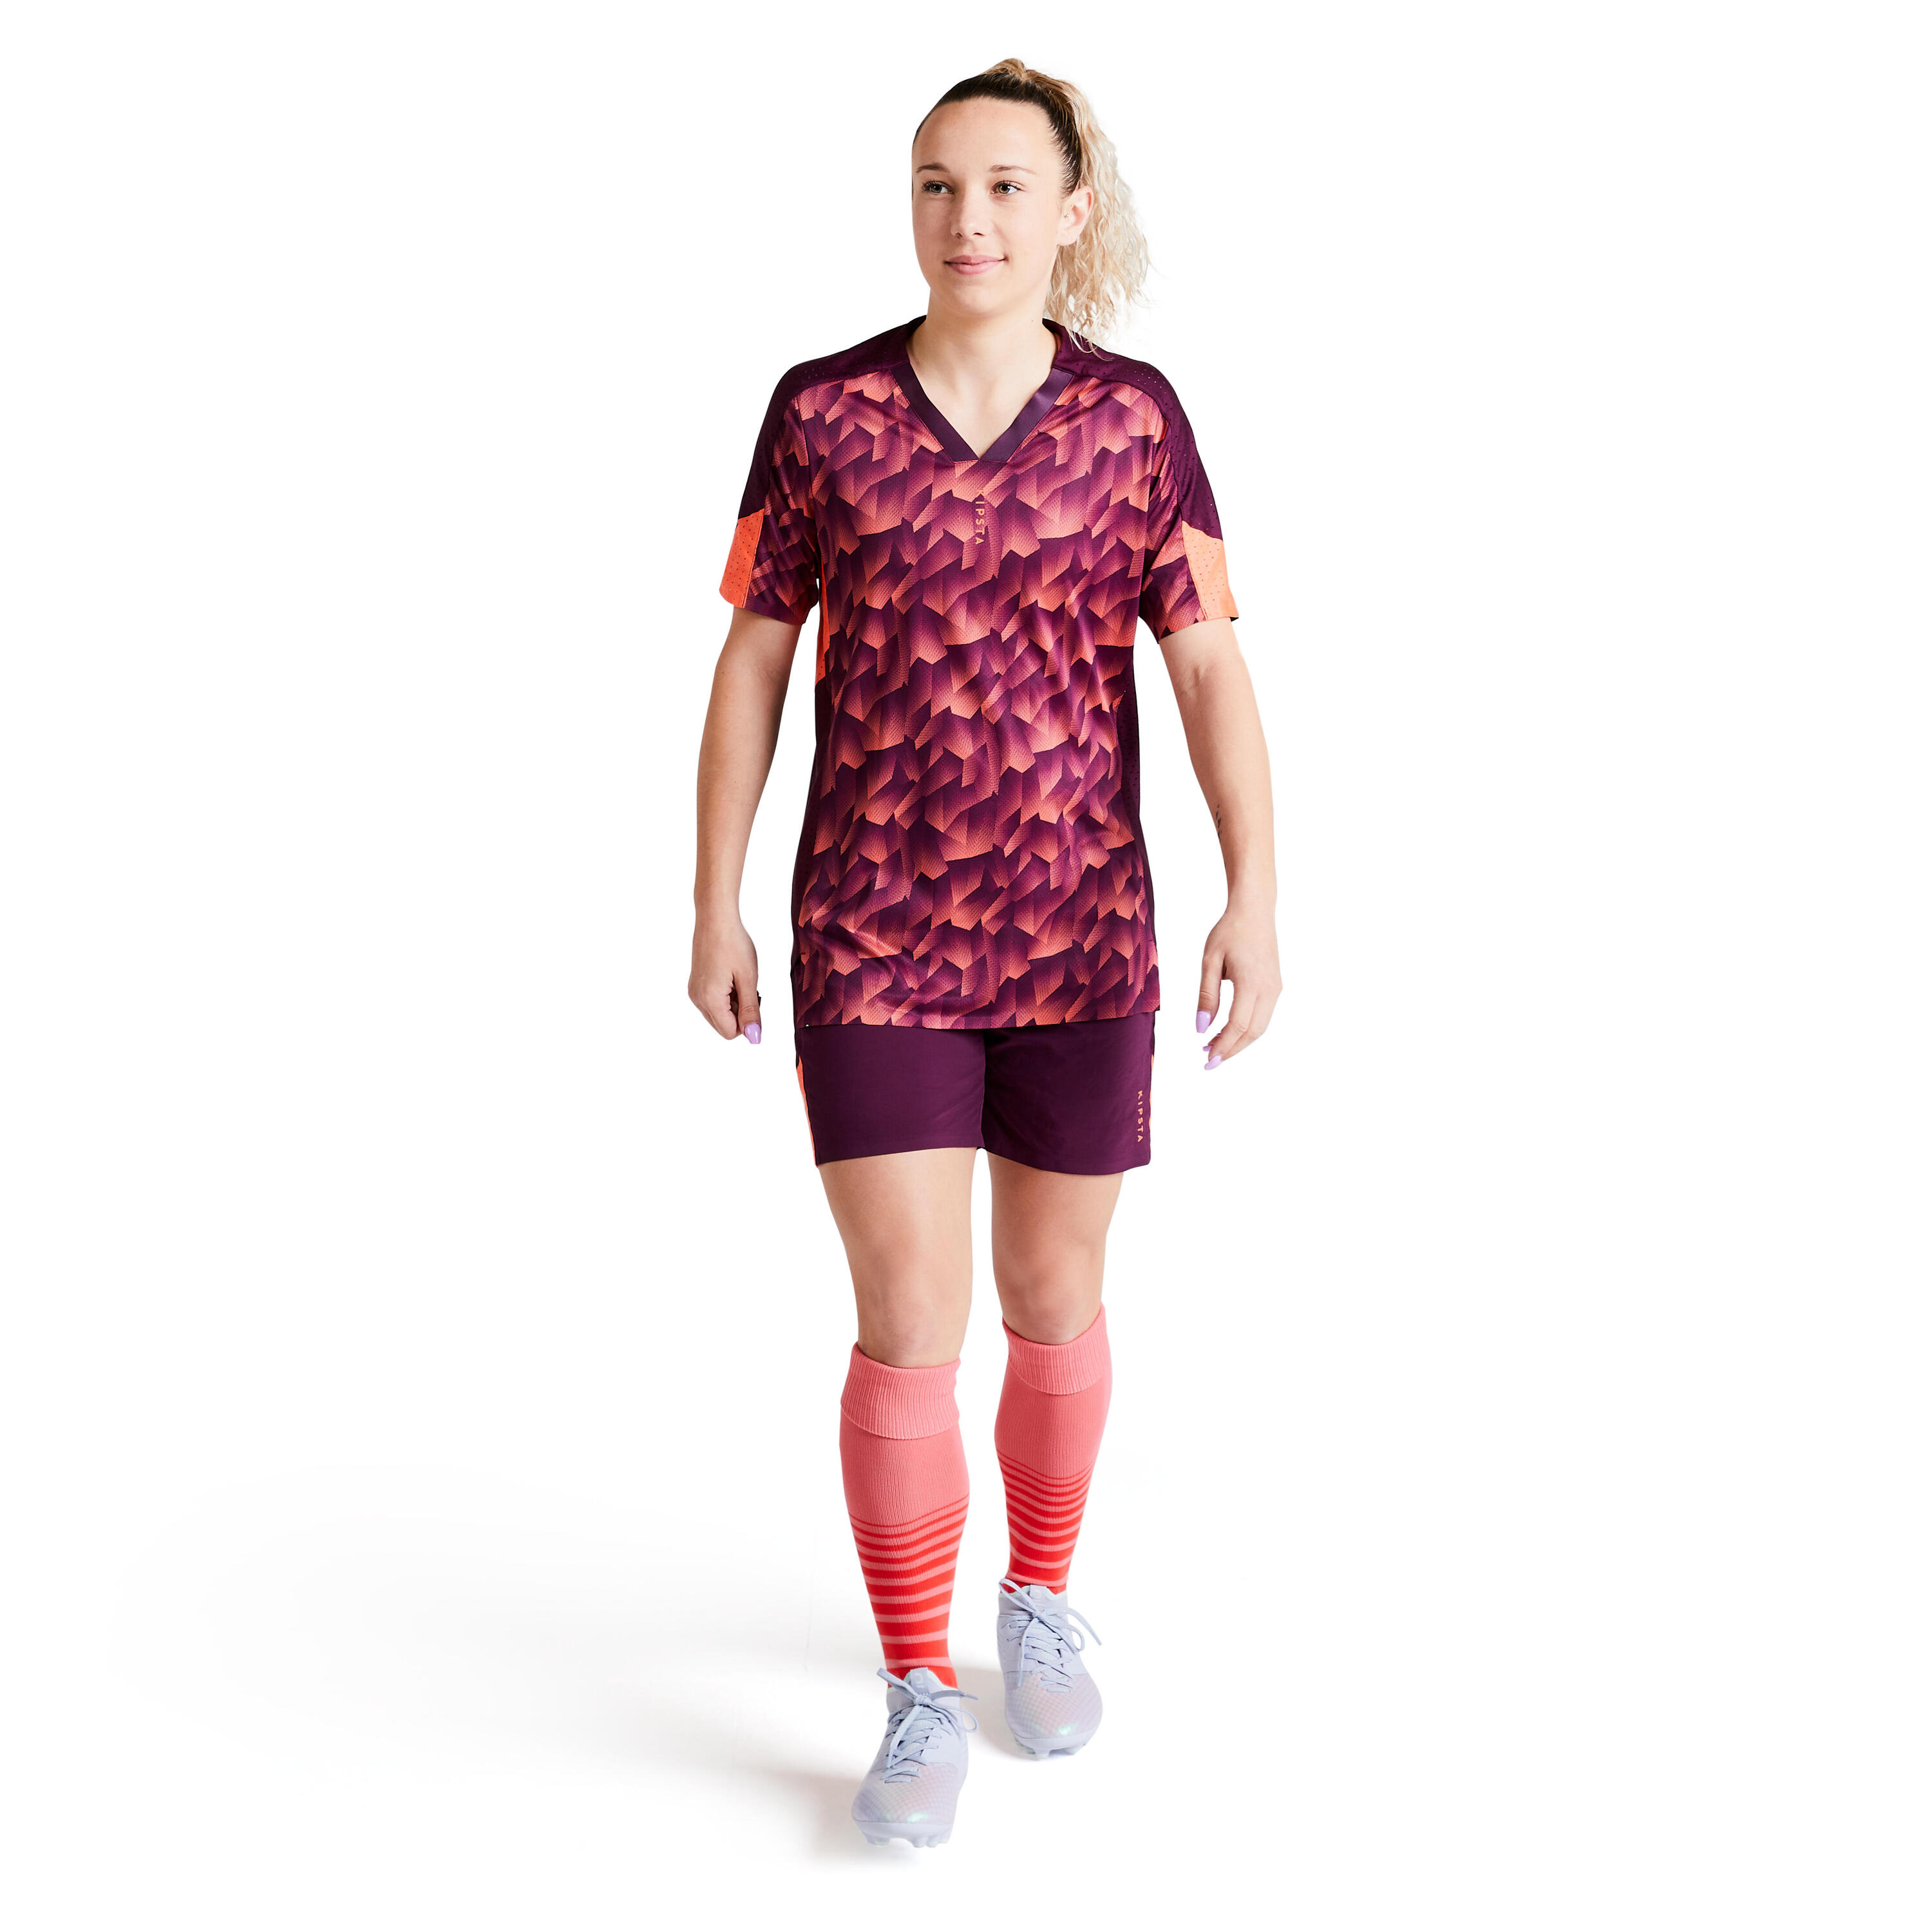 Women's Football Jersey F900 - Coral 7/31